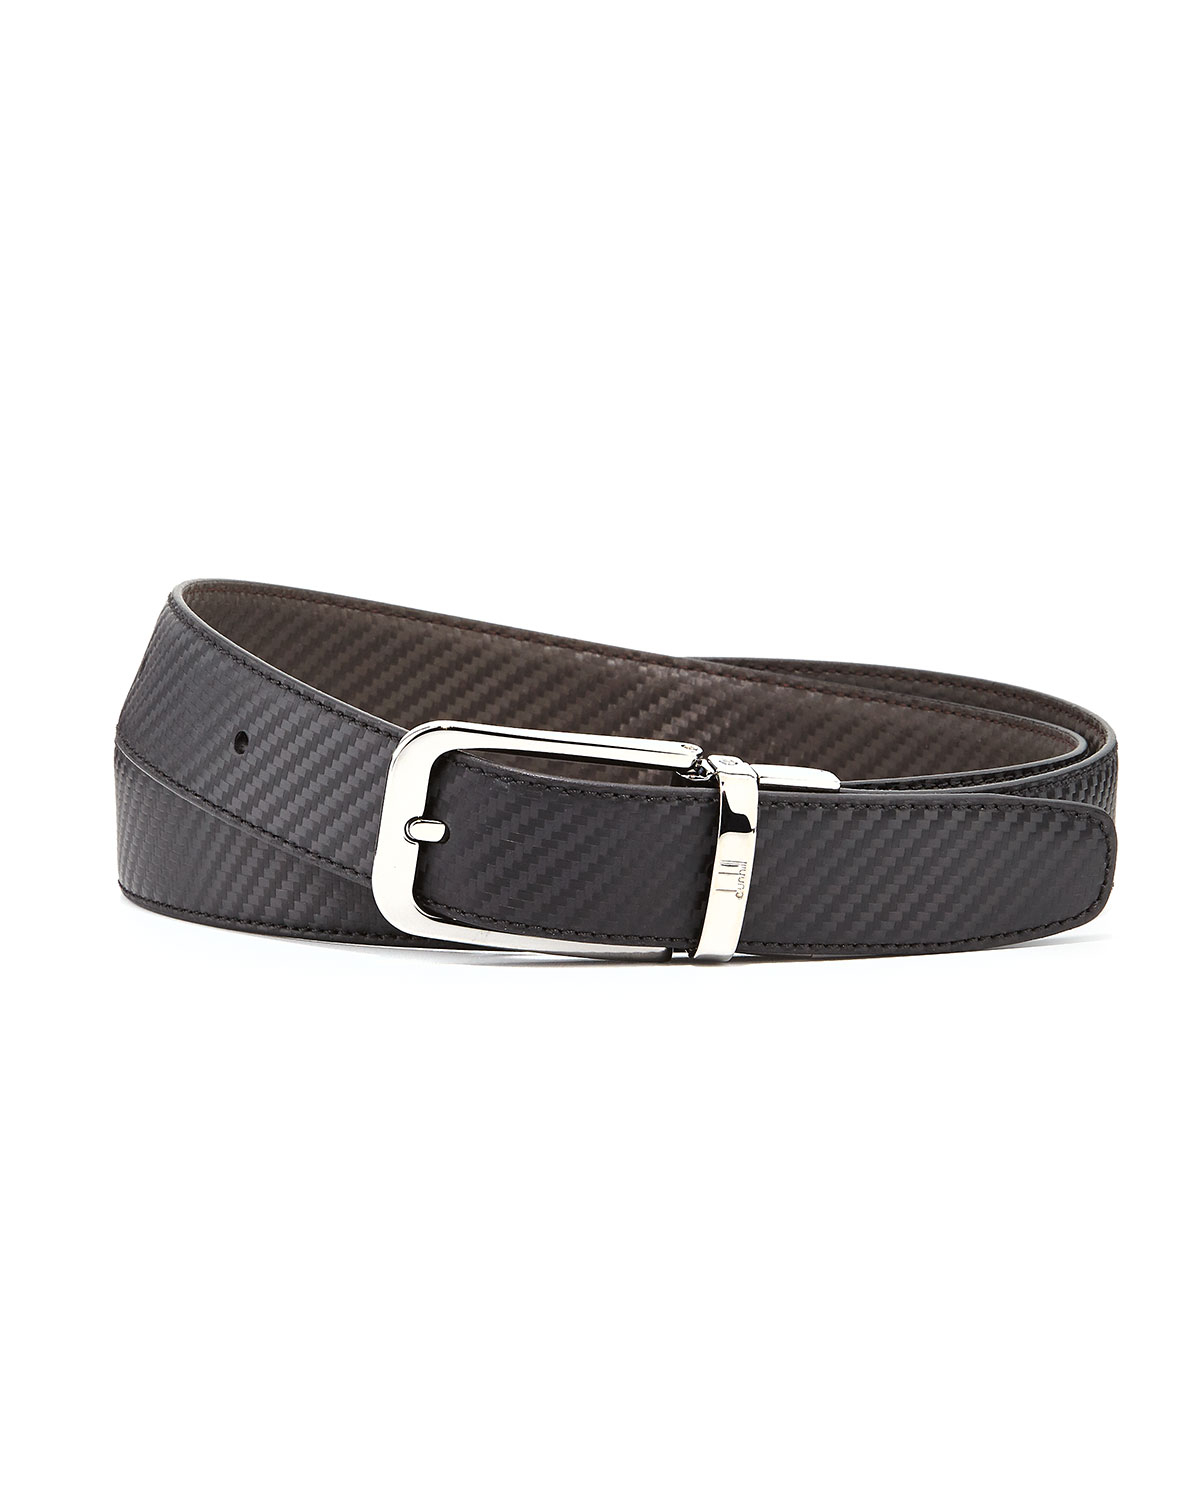 Lyst - Dunhill Chassis Twist Reversible Belt in Brown for Men